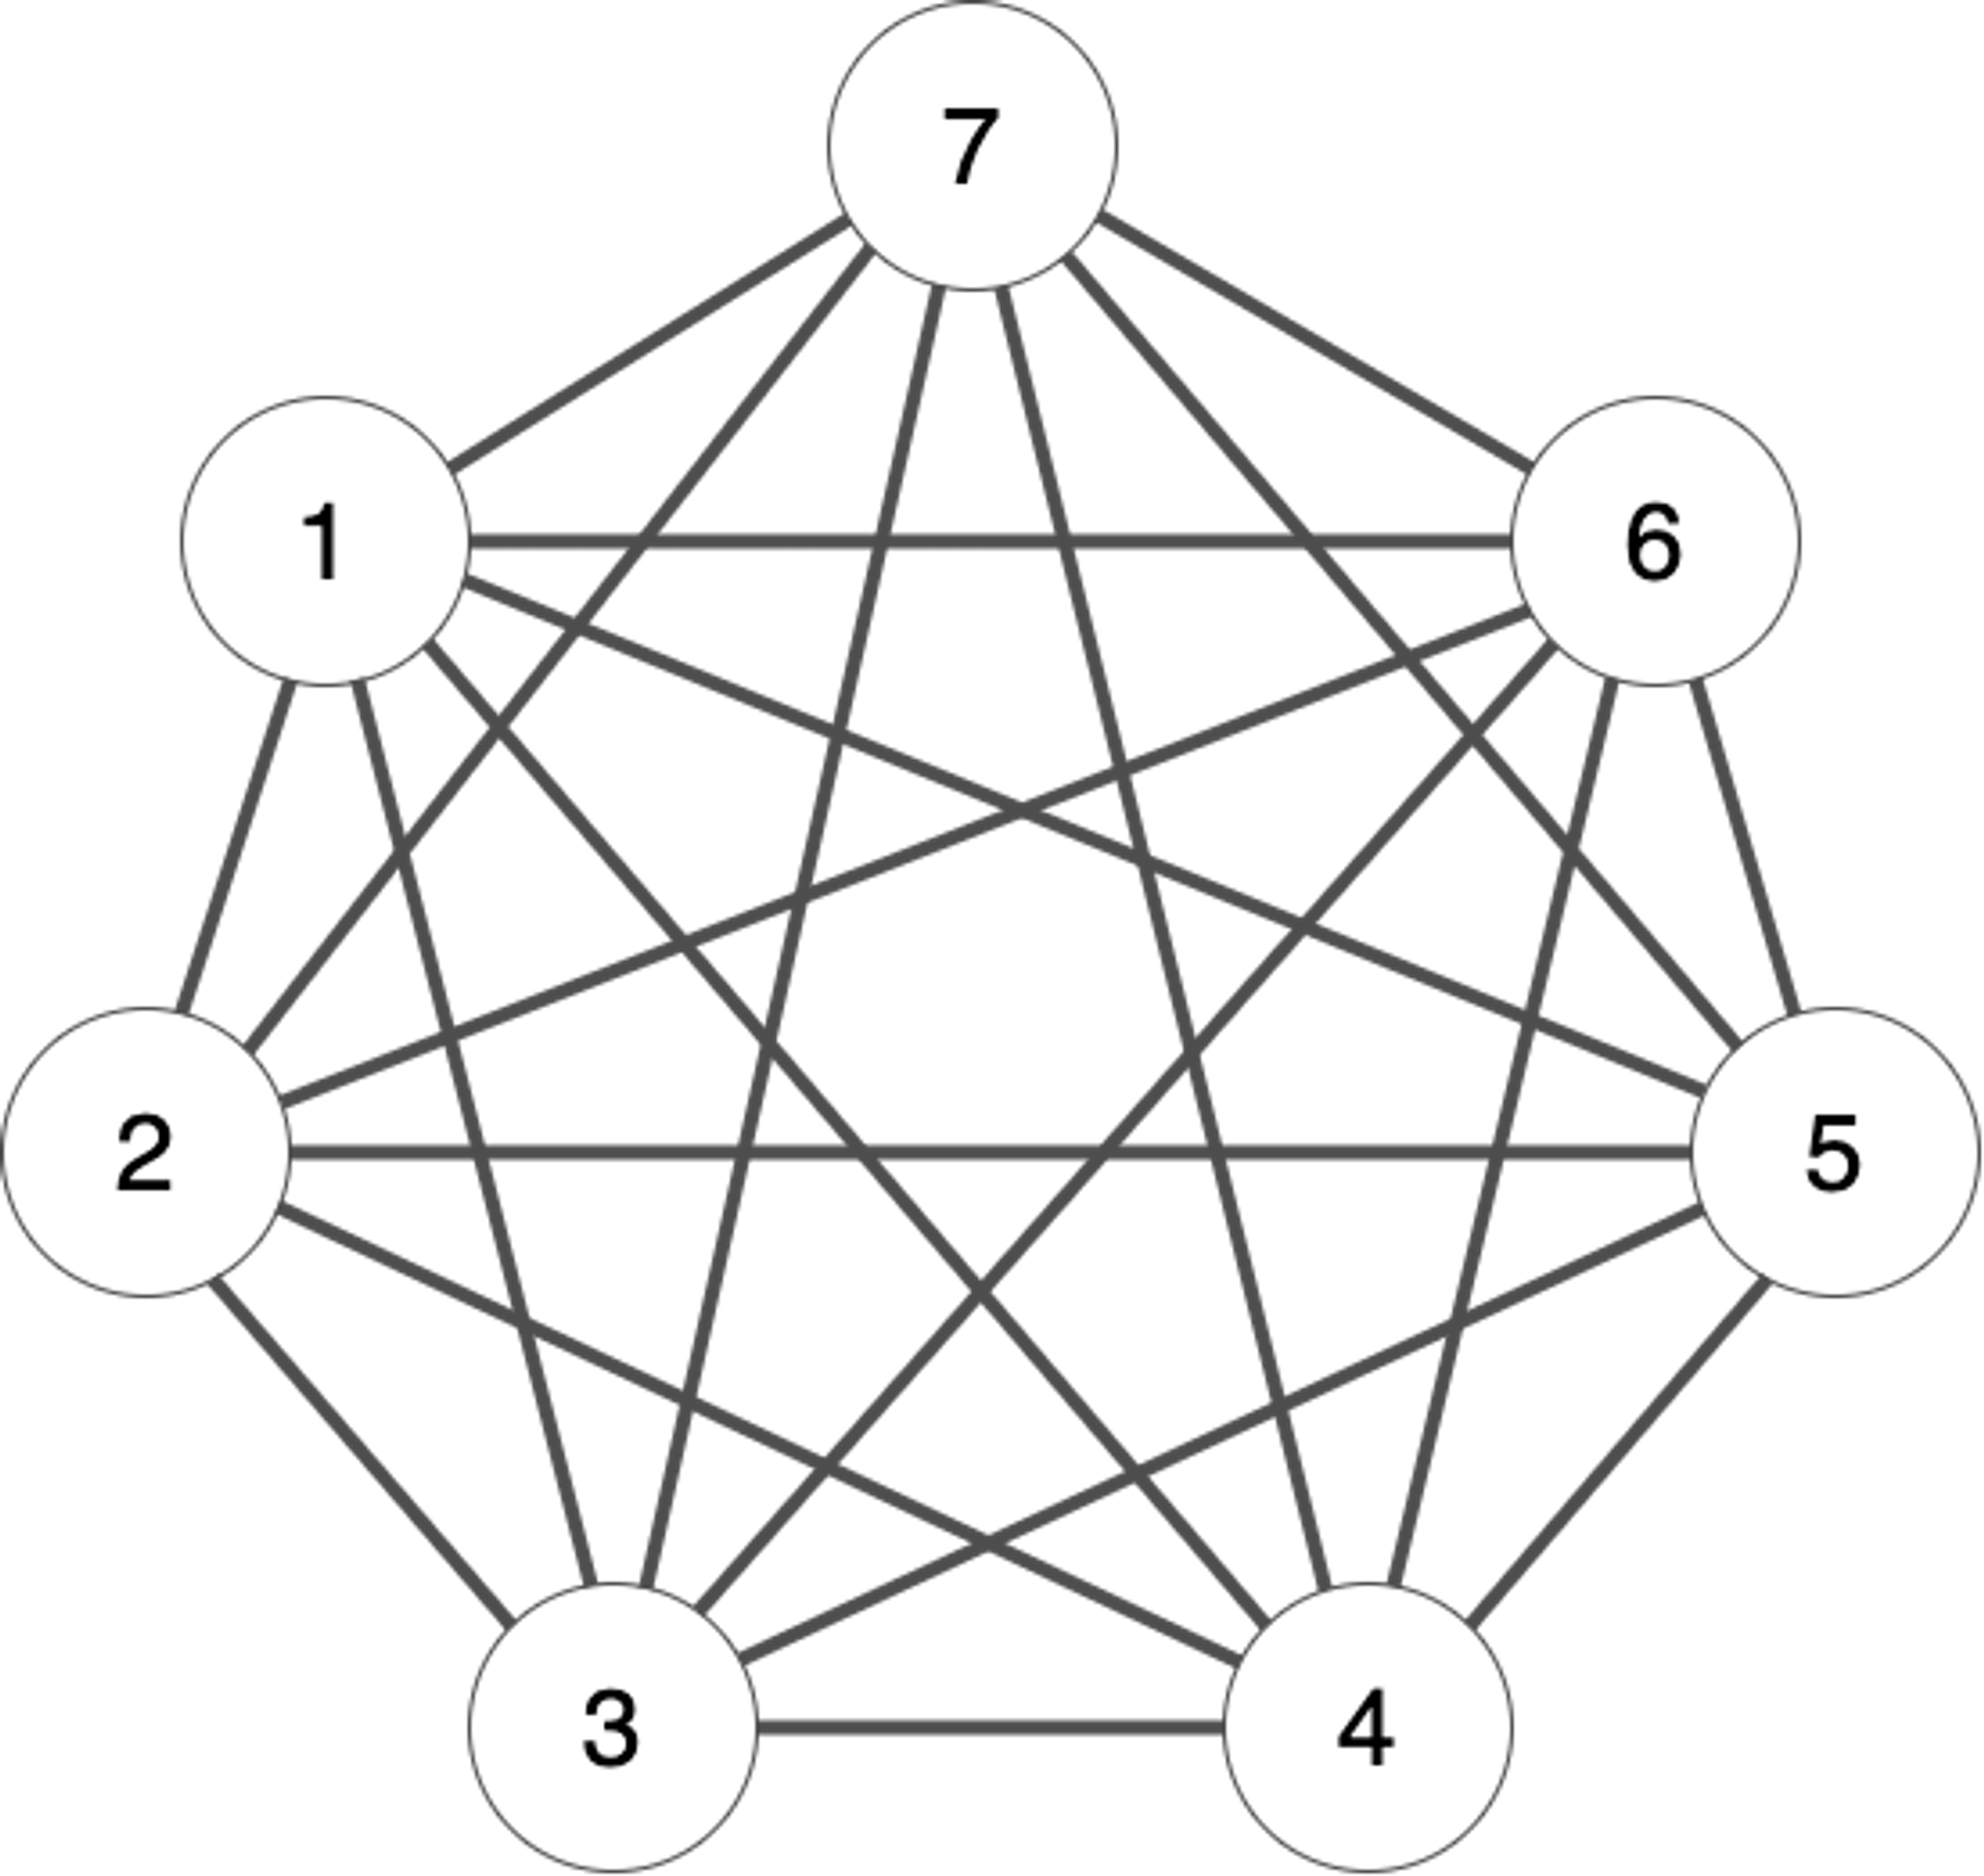 A complete graph with 7 vertices.